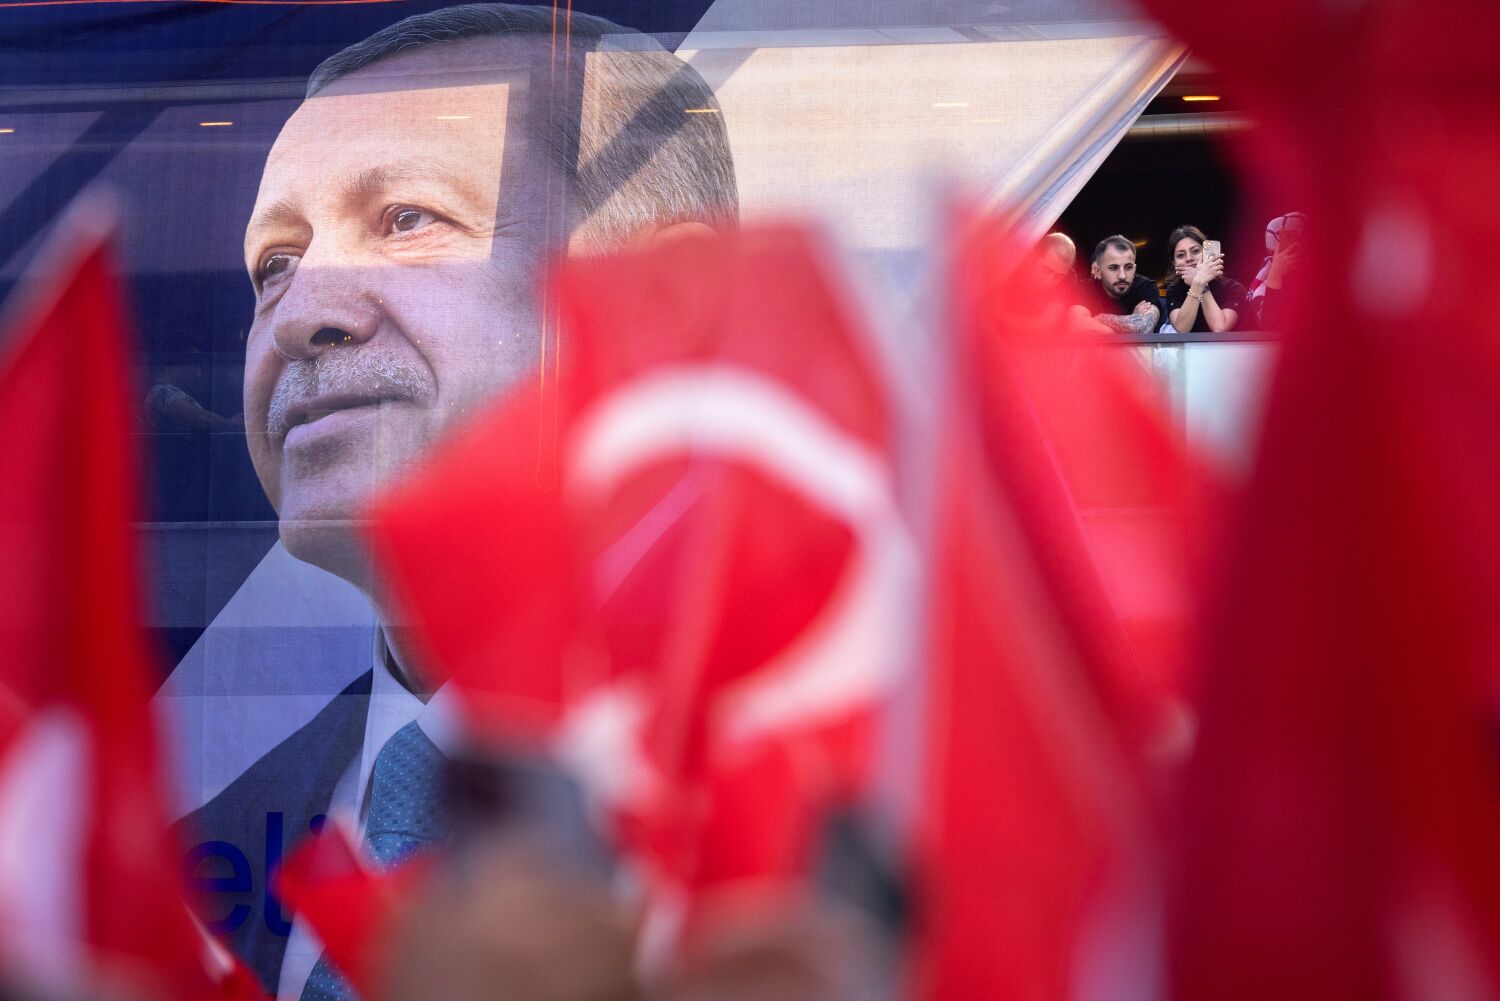 With a likely Erdogan win, Turkey will continue to play both sides of the U.S.-Russia divide